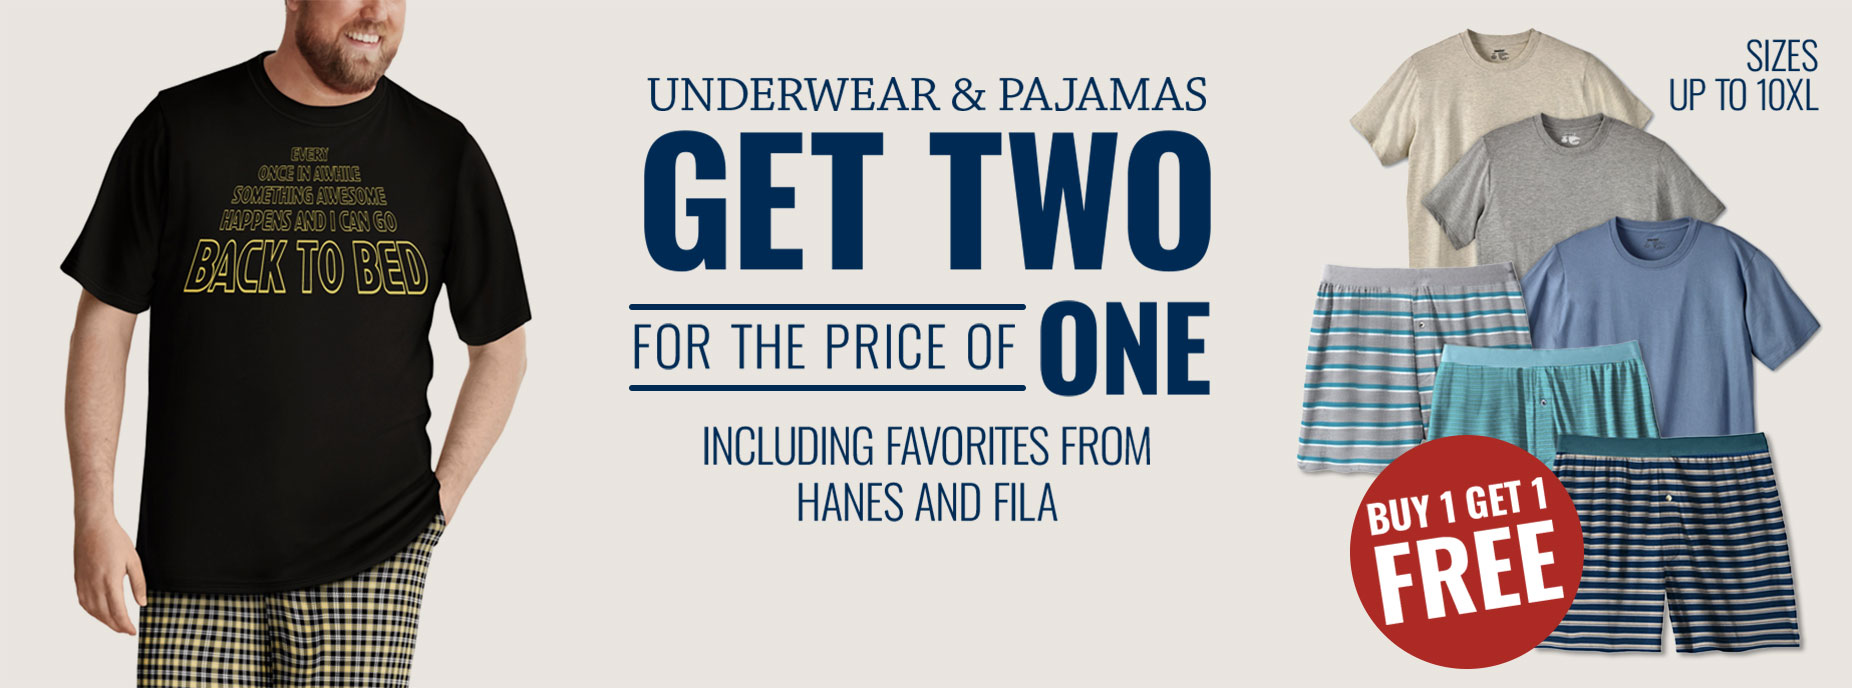 Underwear and pajamas get two for the price of one